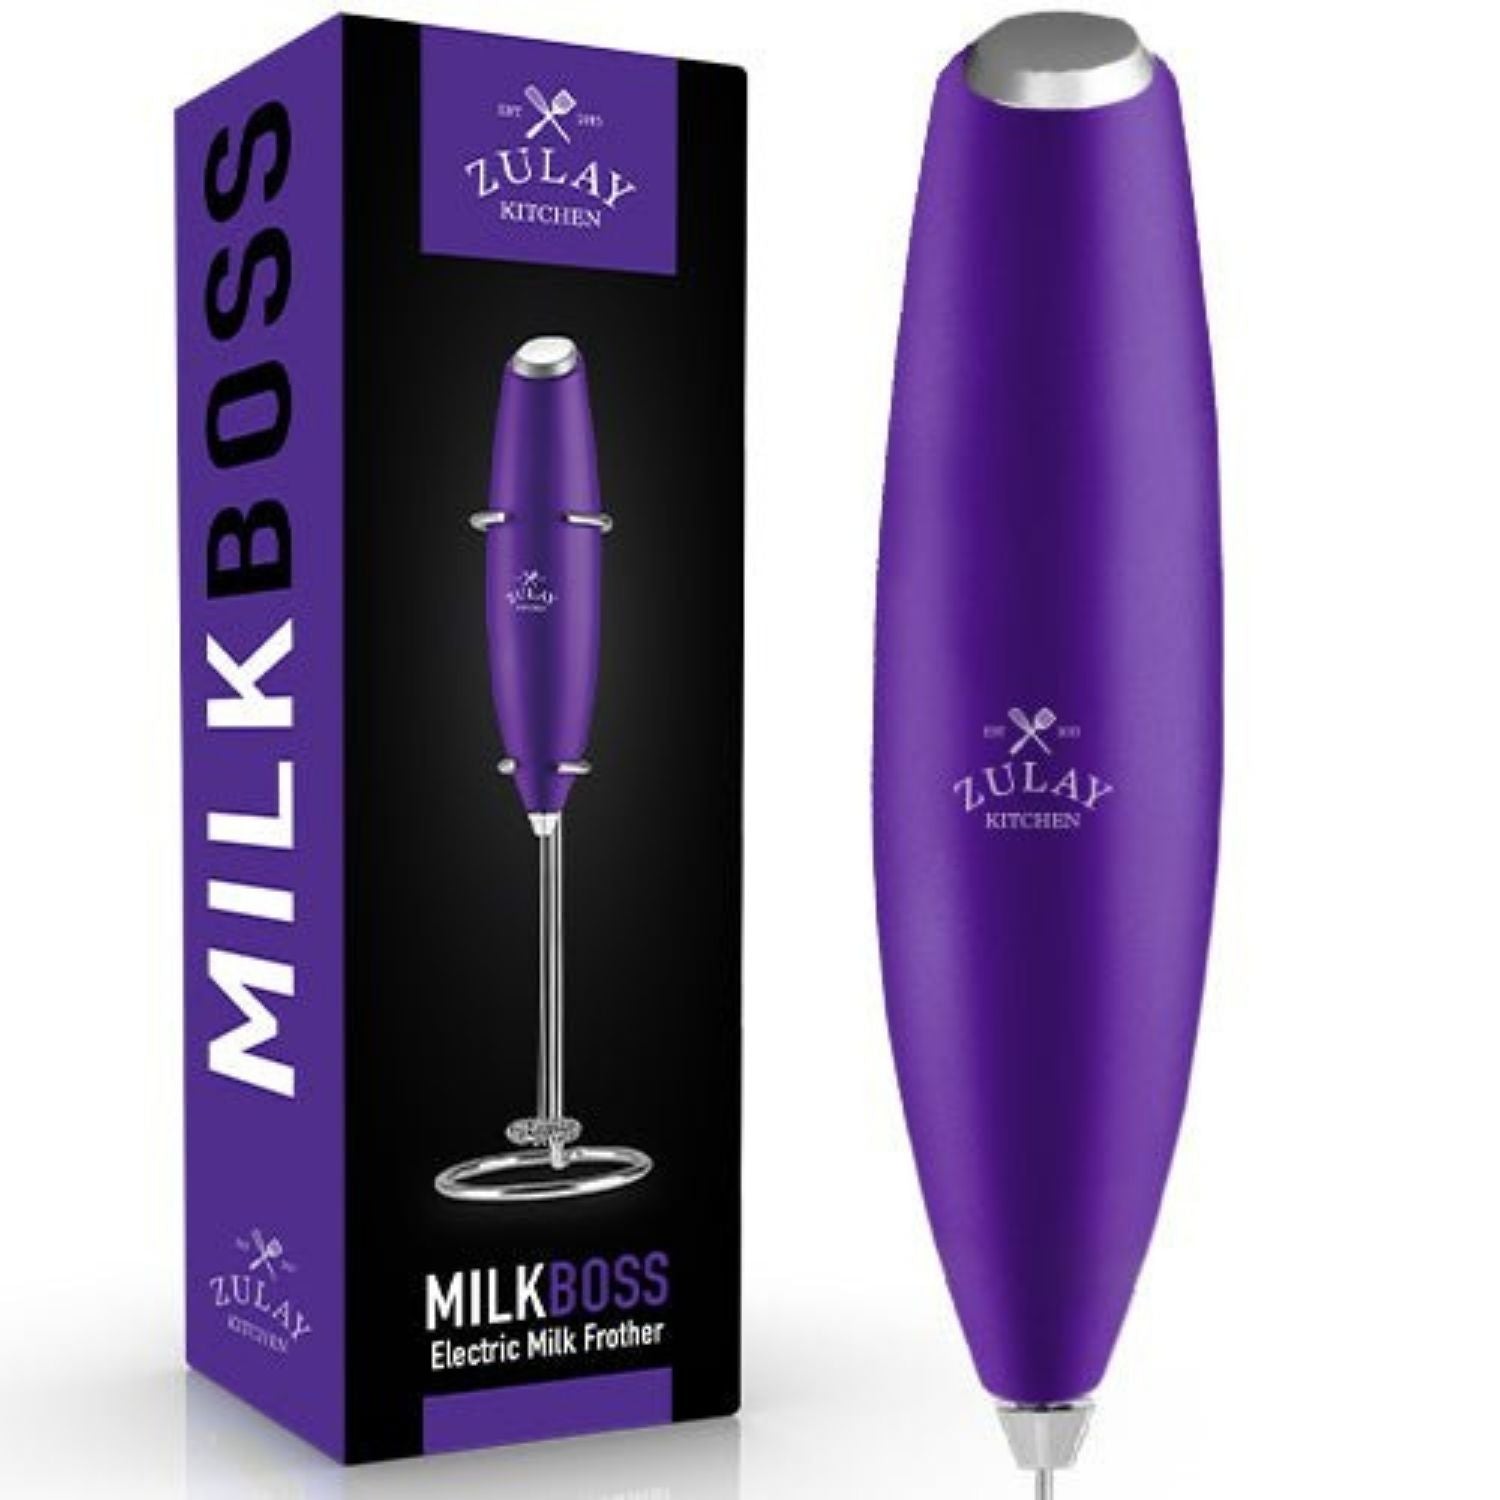 Zulay Kitchen MILK BOSS Milk Frother With Stand - Northern Lights  (Purple/Teal), 1 - Harris Teeter